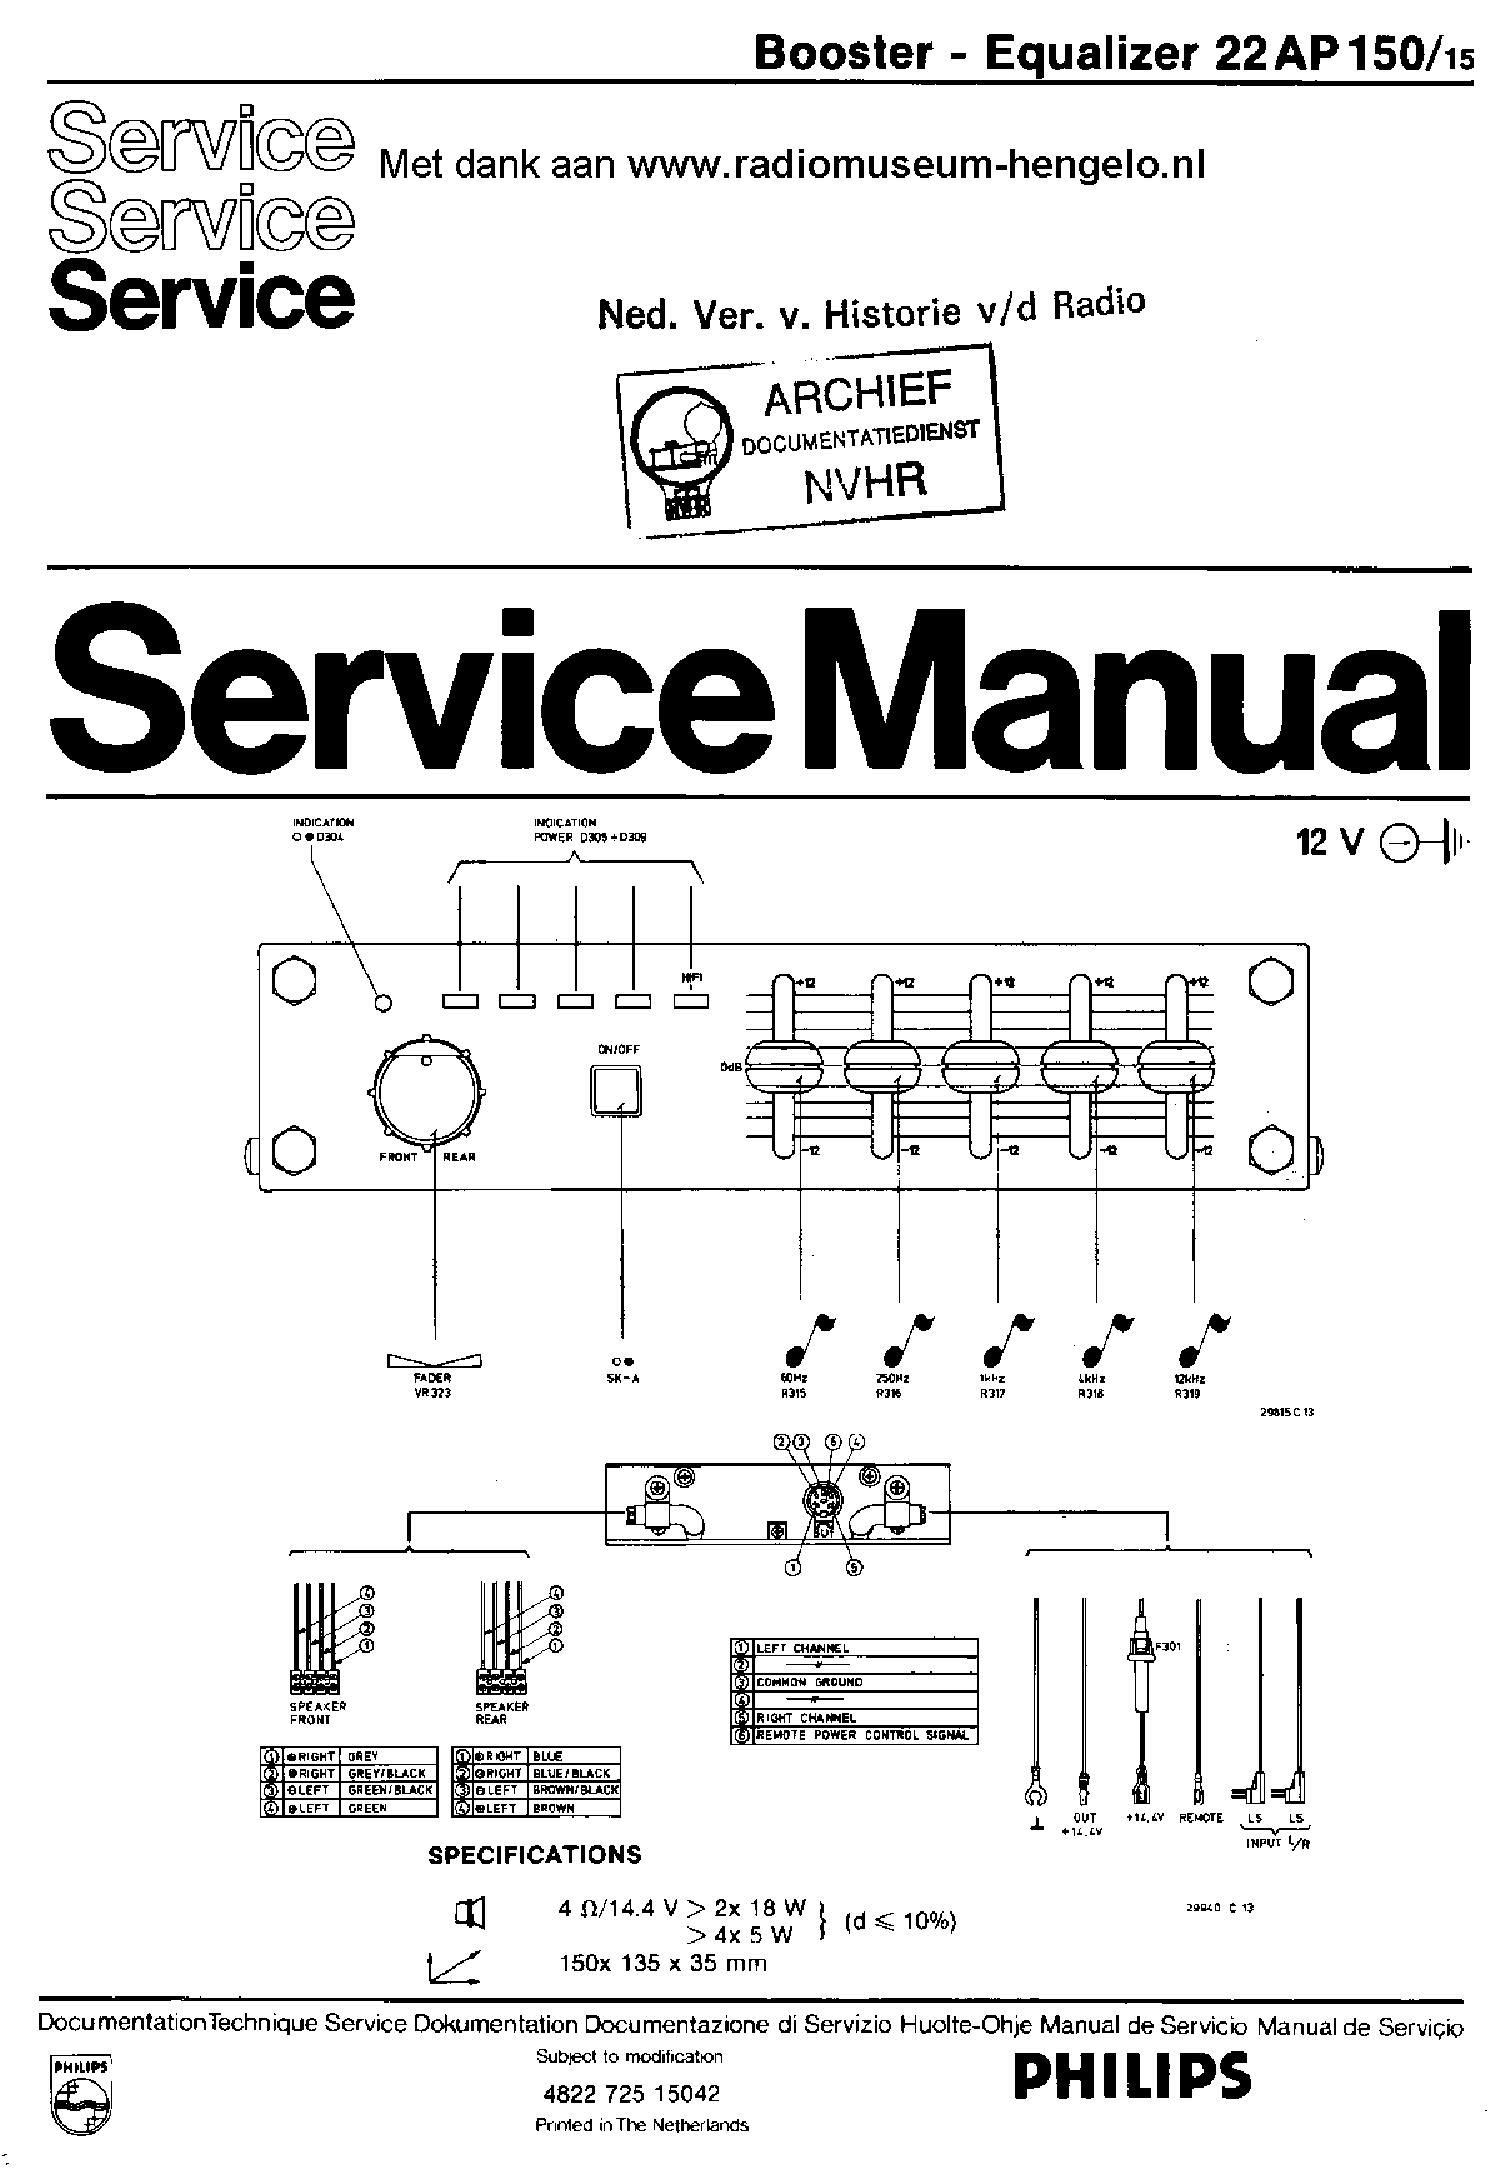 PHILIPS 22AP150-15 BOOSTER EQUALIZER SM service manual (1st page)